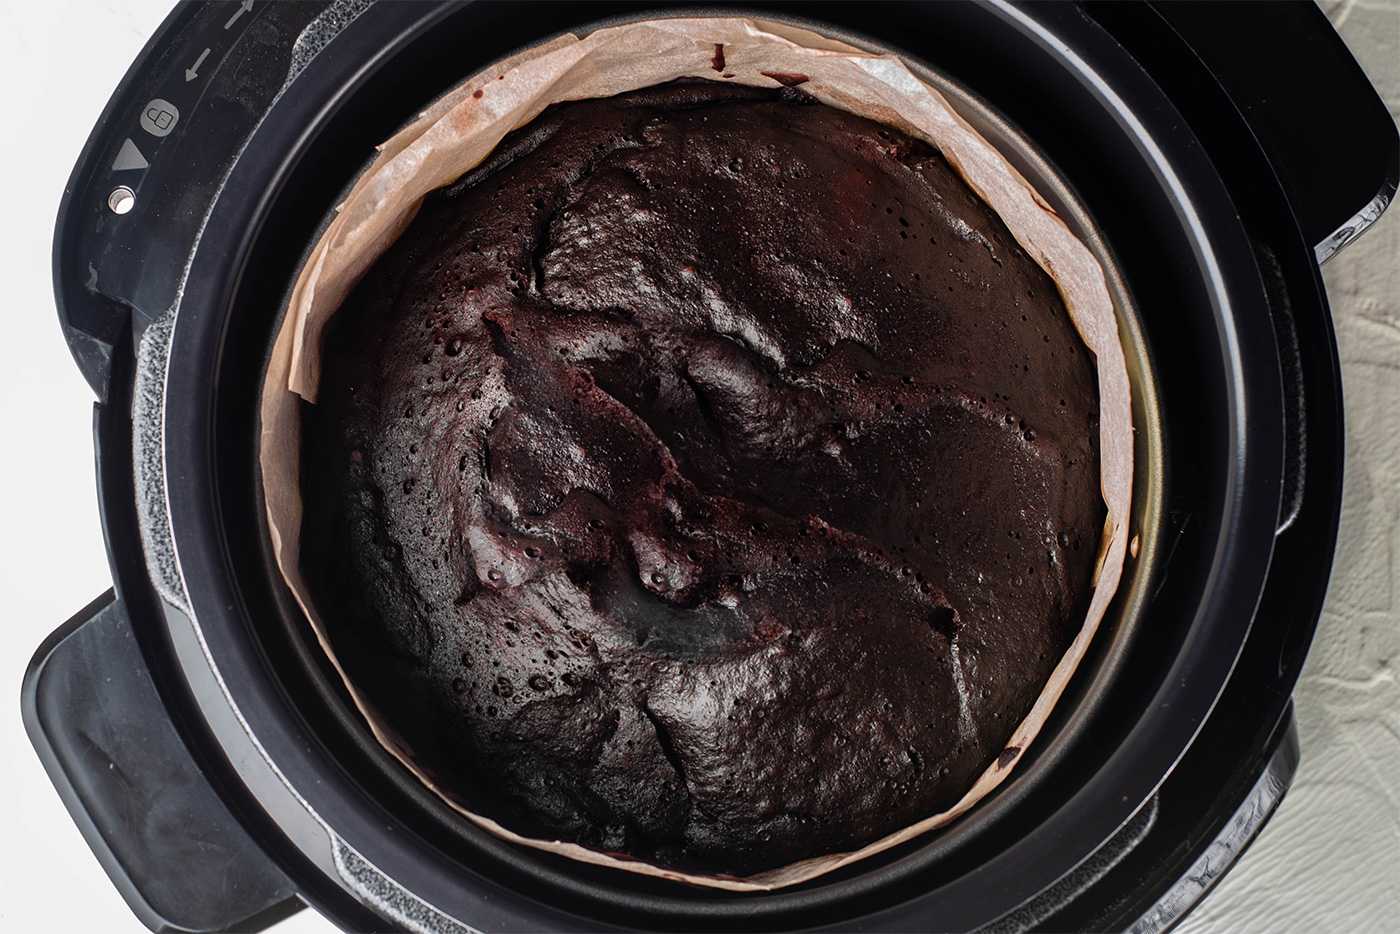 How Long To Cook Cake In An Electric Pressure Cooker